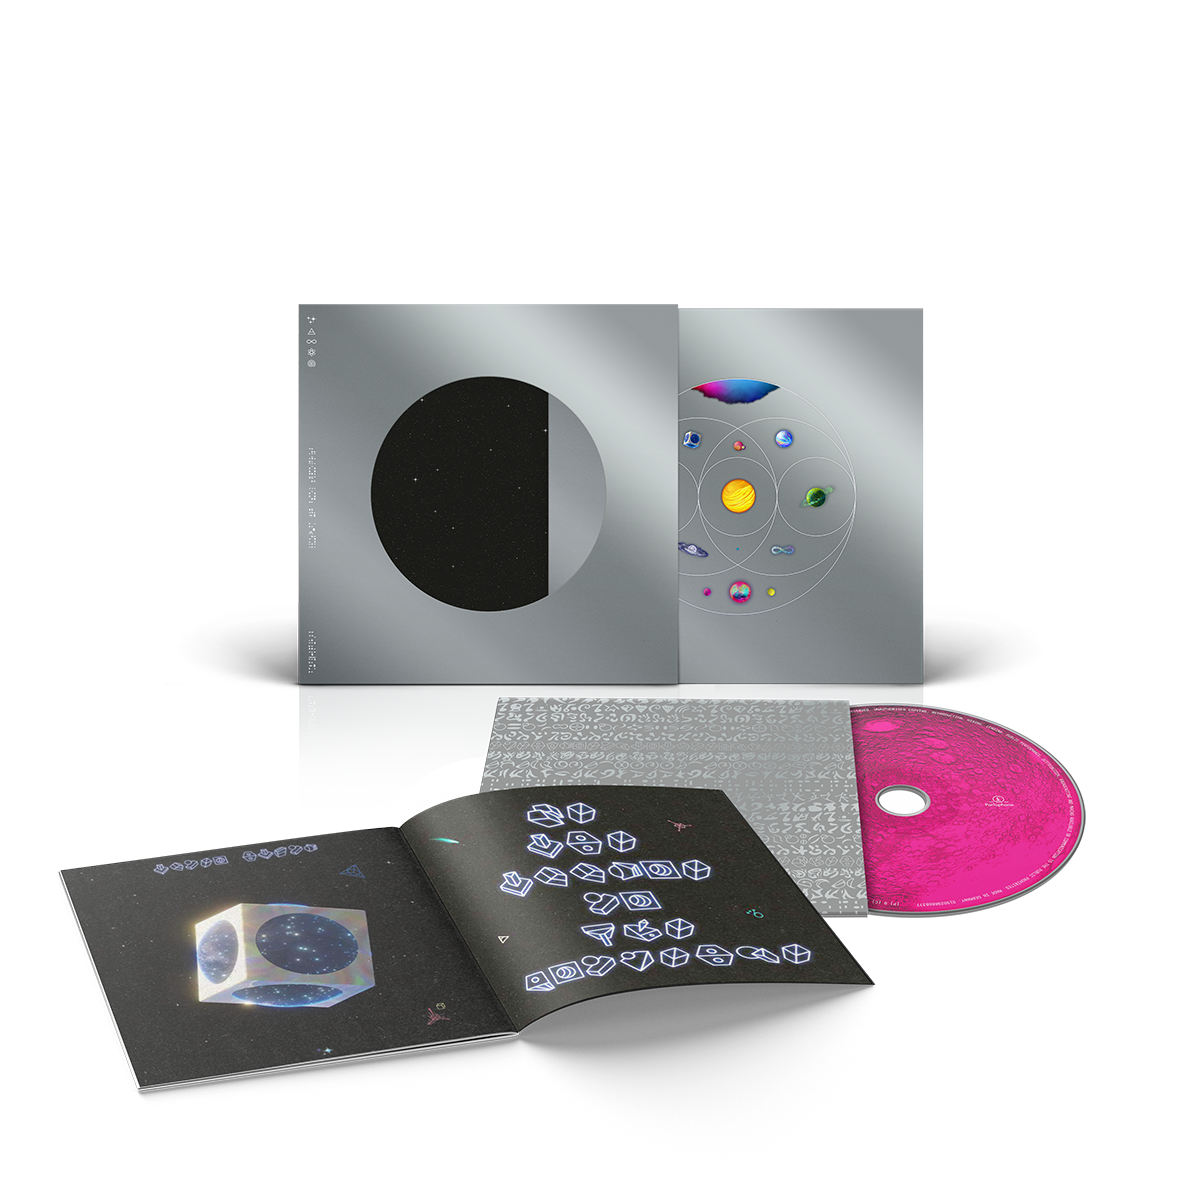 kapsel Gedachte Sluiting Music Of The Spheres - Infinity Station CD (Limited Edition) – Coldplay US